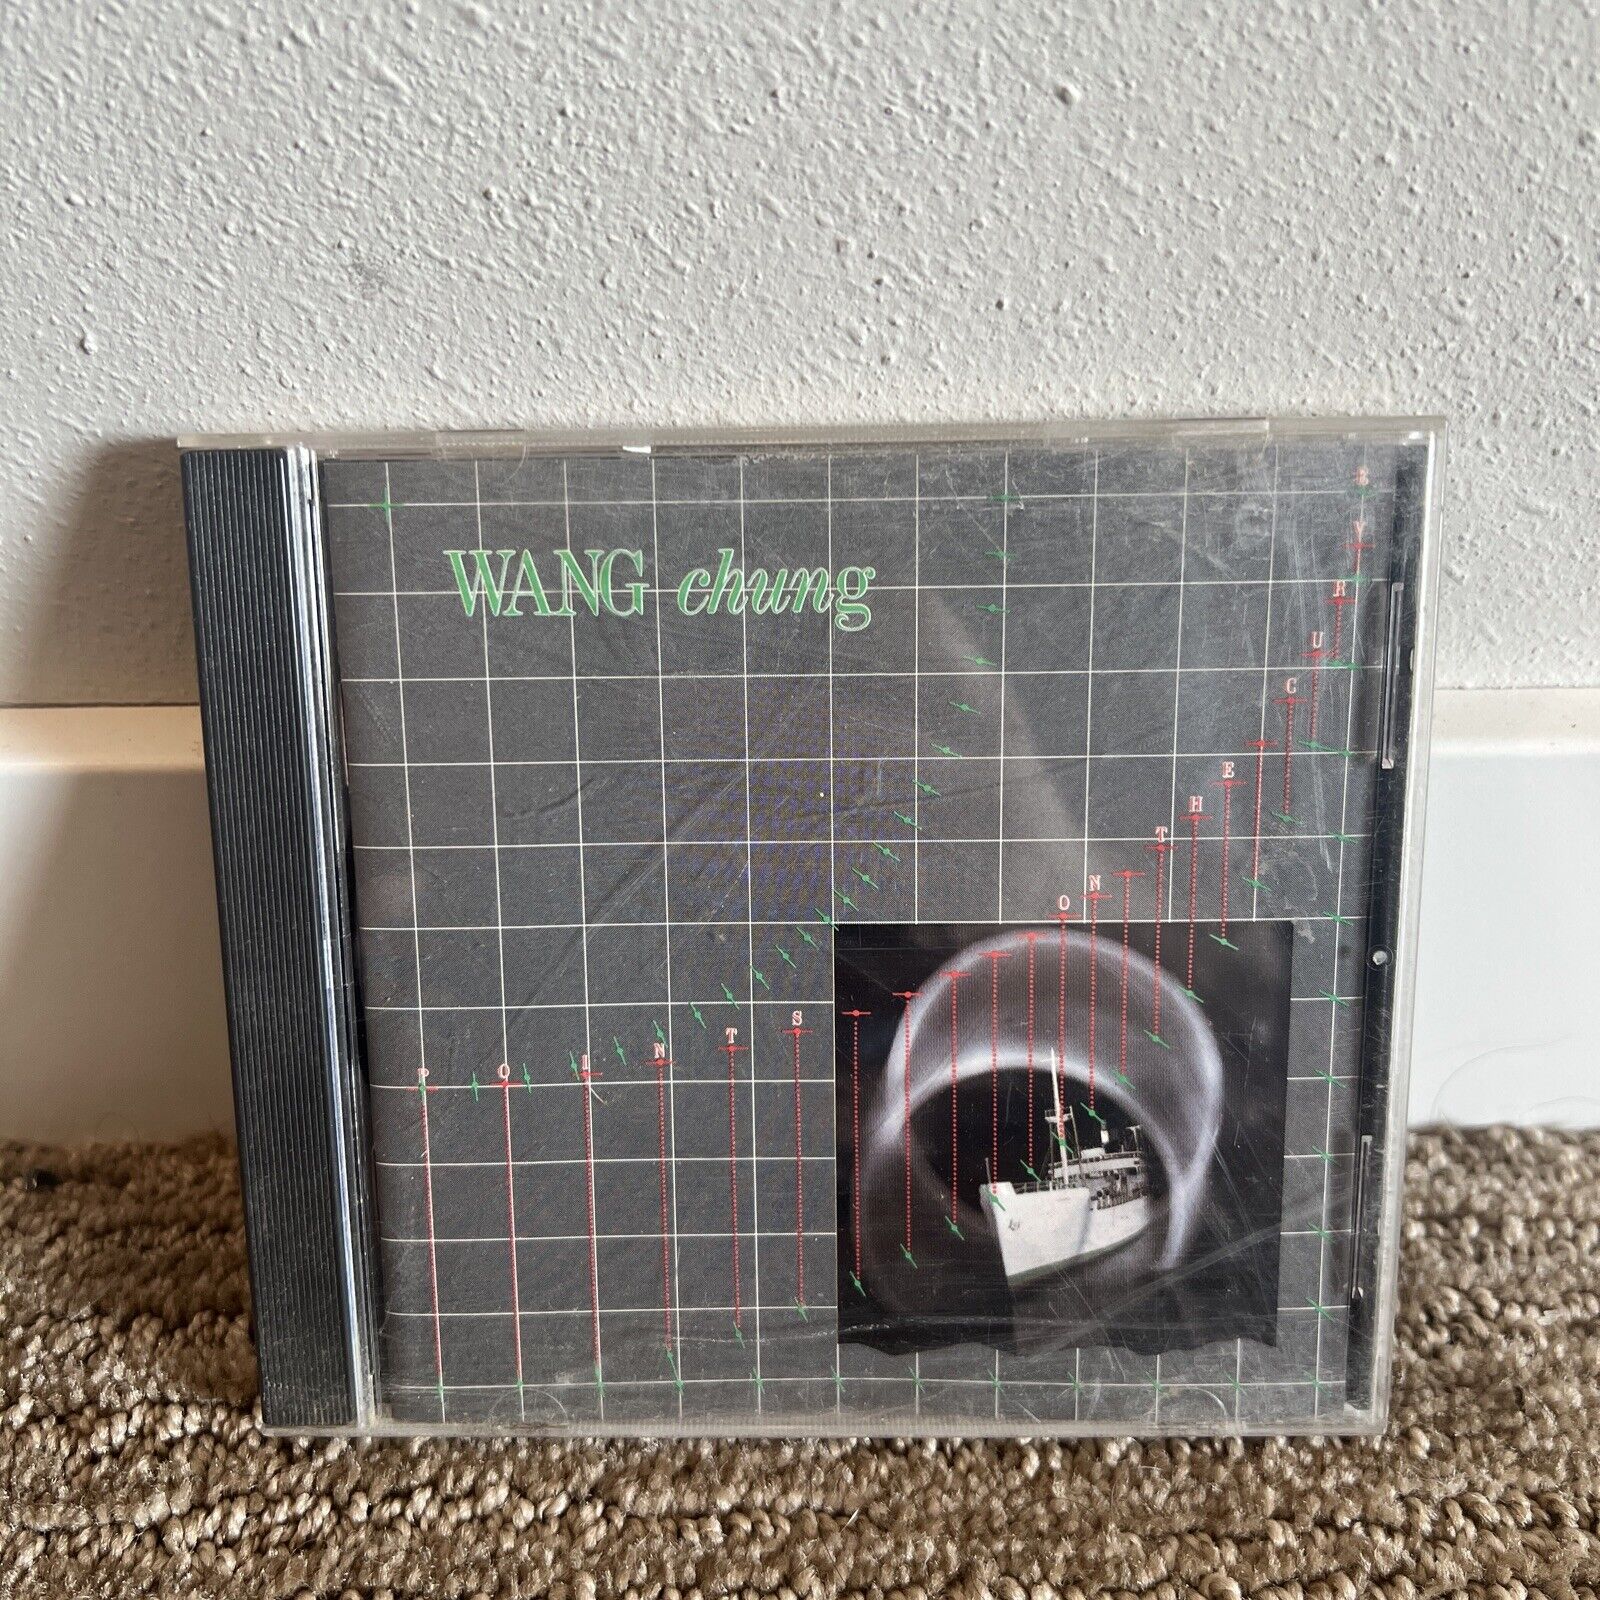 Points On The Curve by Wang Chung (CD, 1996)